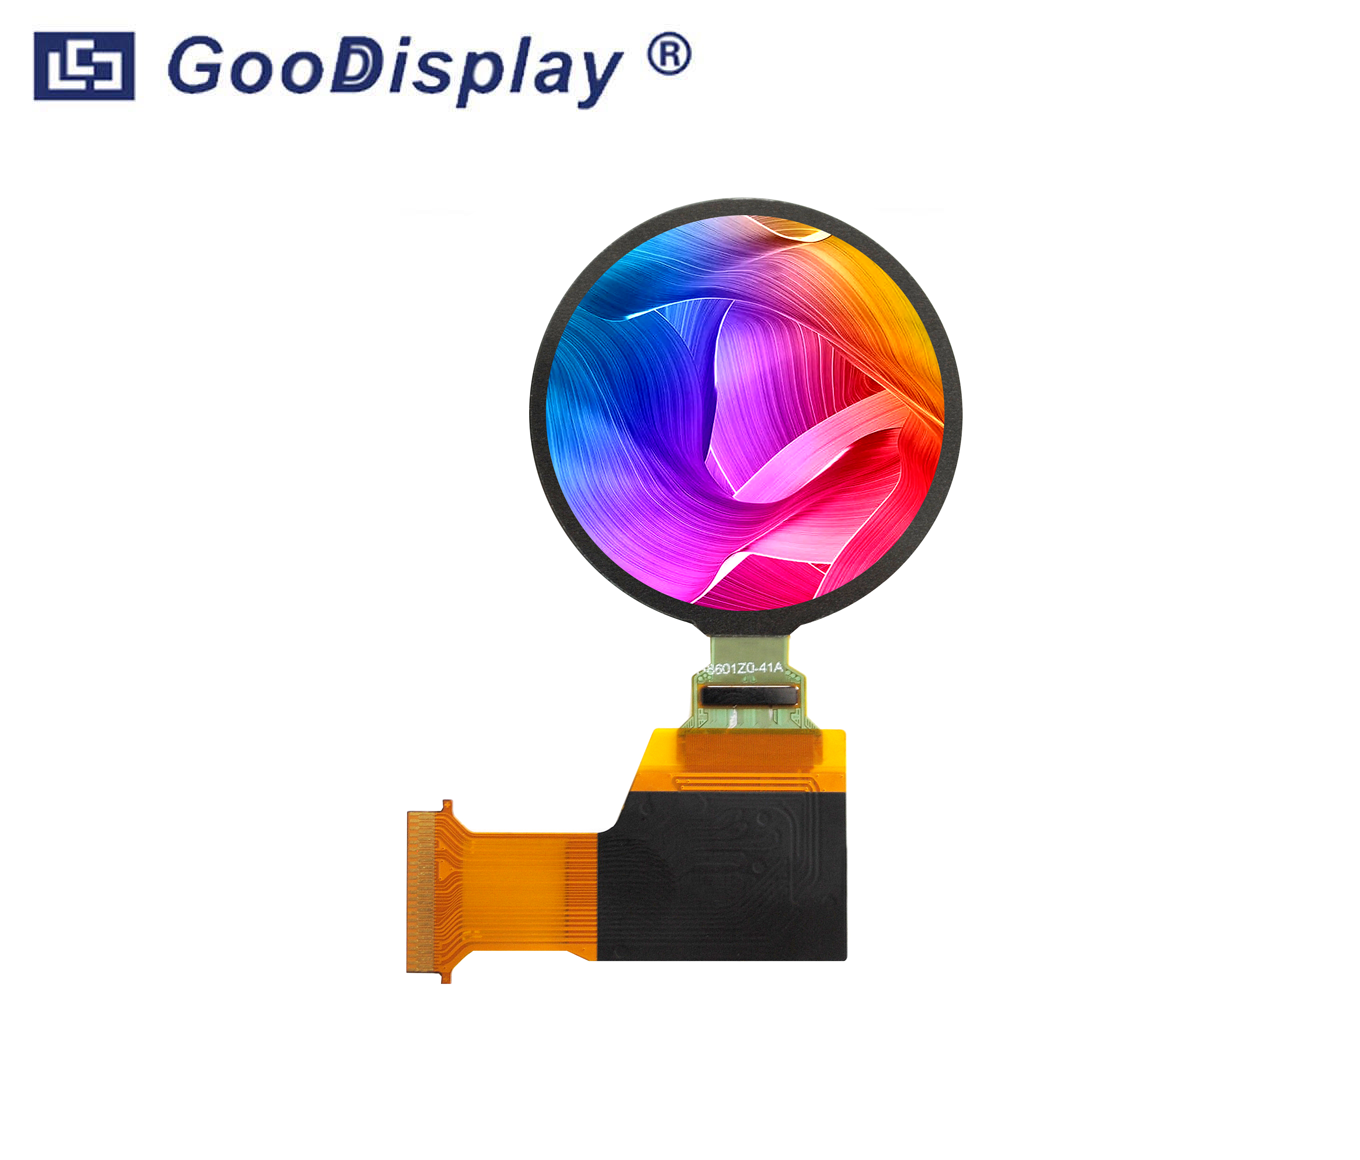 1.39 inch color AM-OLED 454x454, outdoor display: GDOD0139CP45.